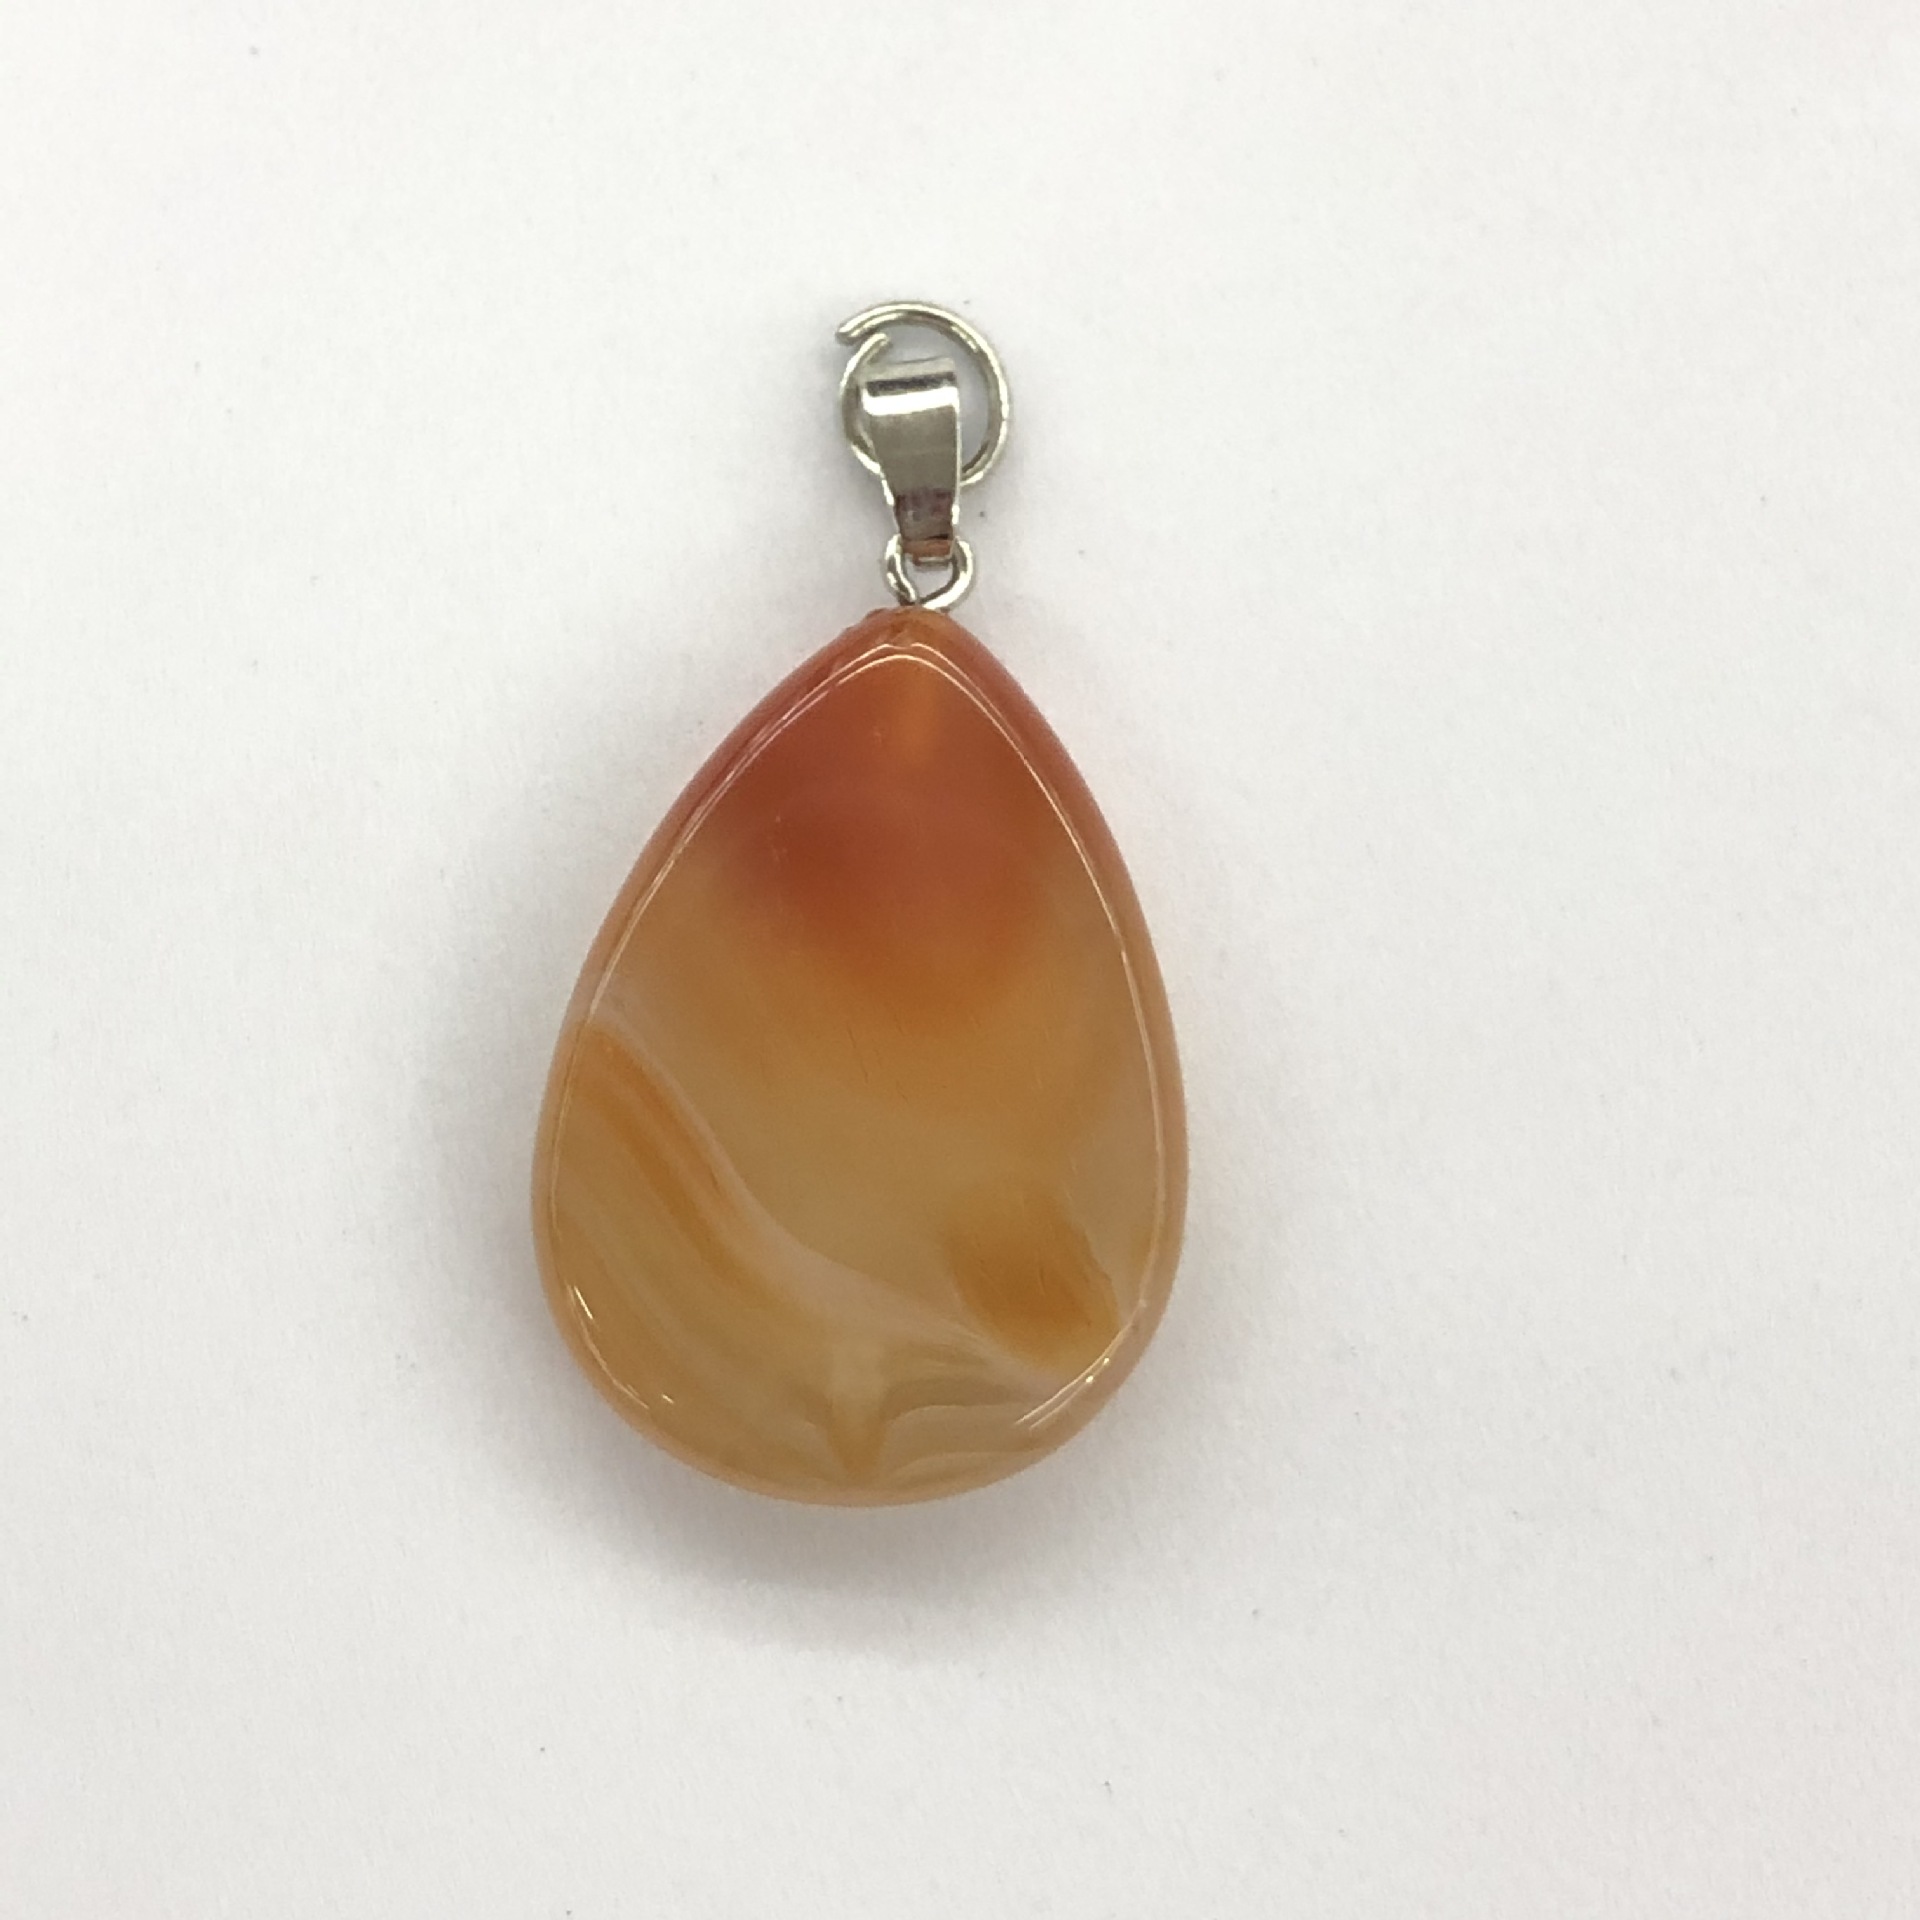 natural red agate